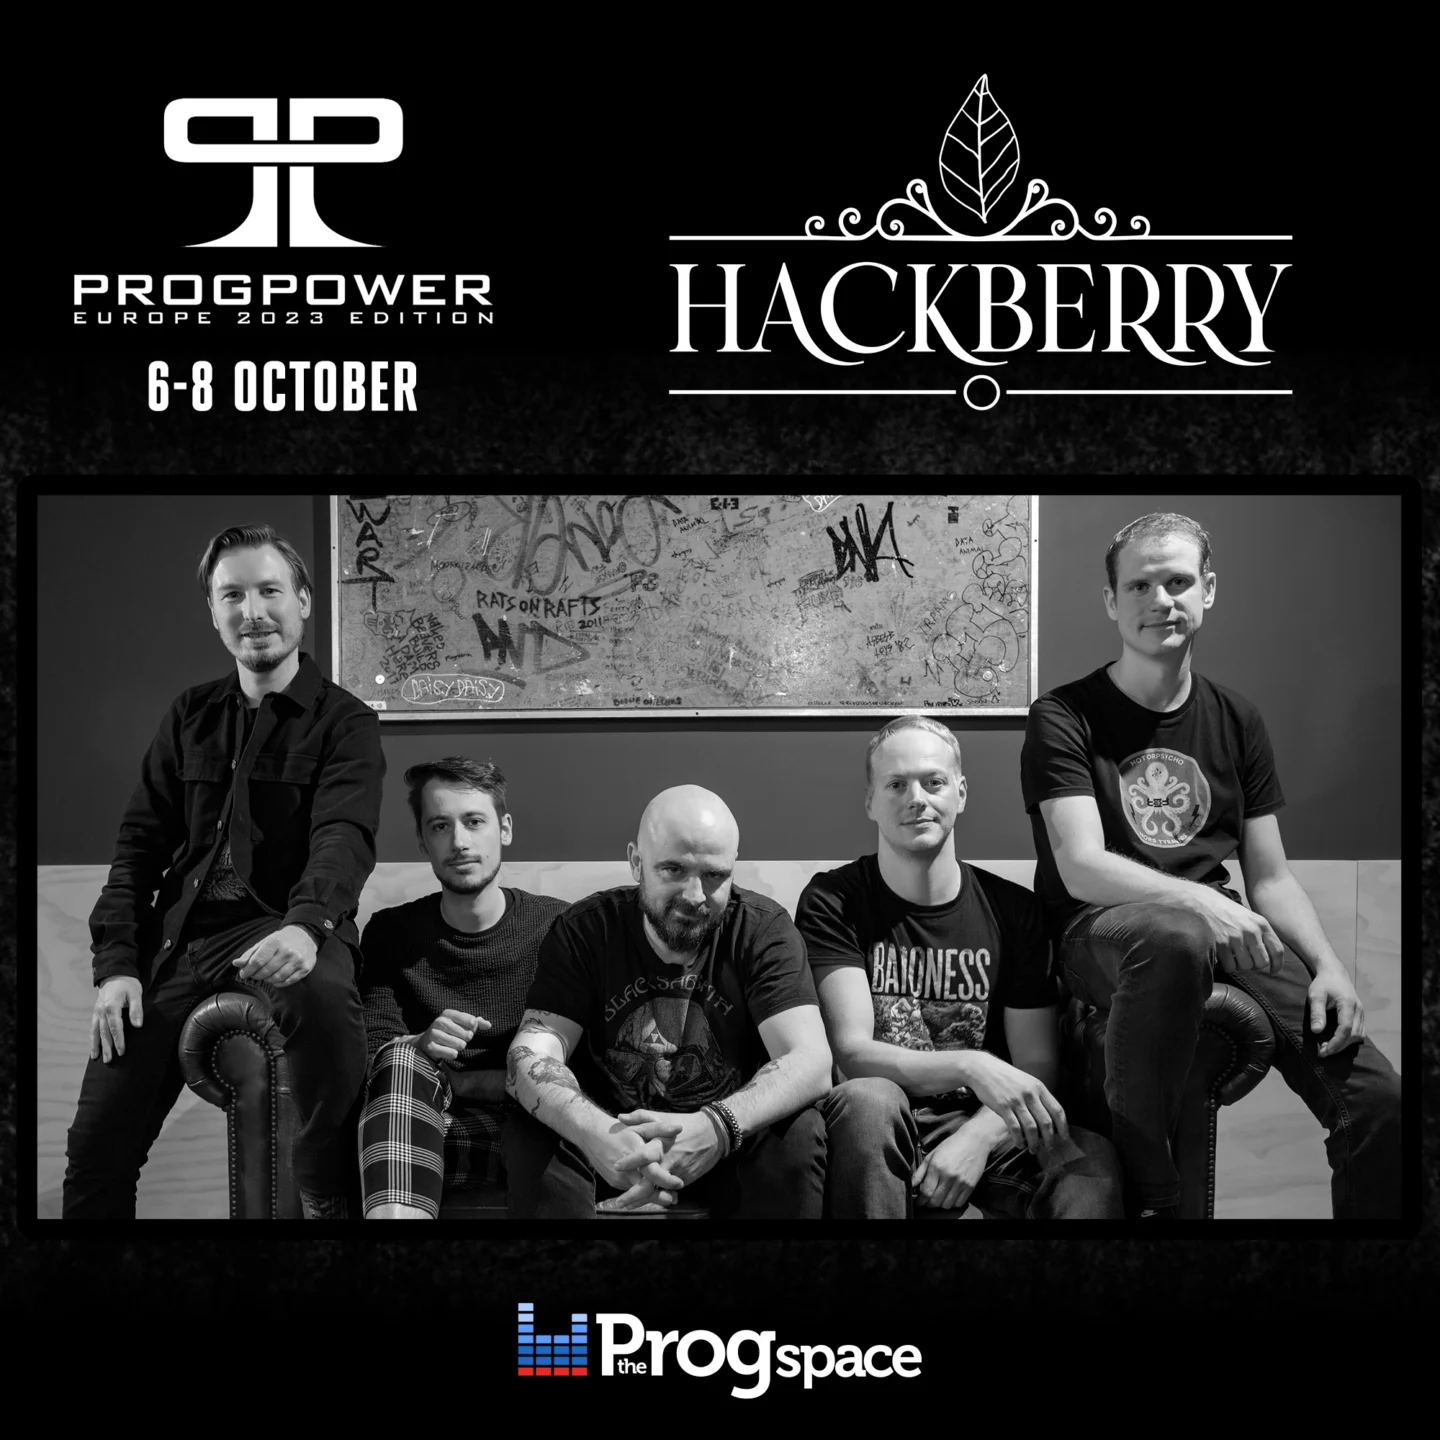 Welcome Hackberry as the 13th band at ProgPower Europe 2023!